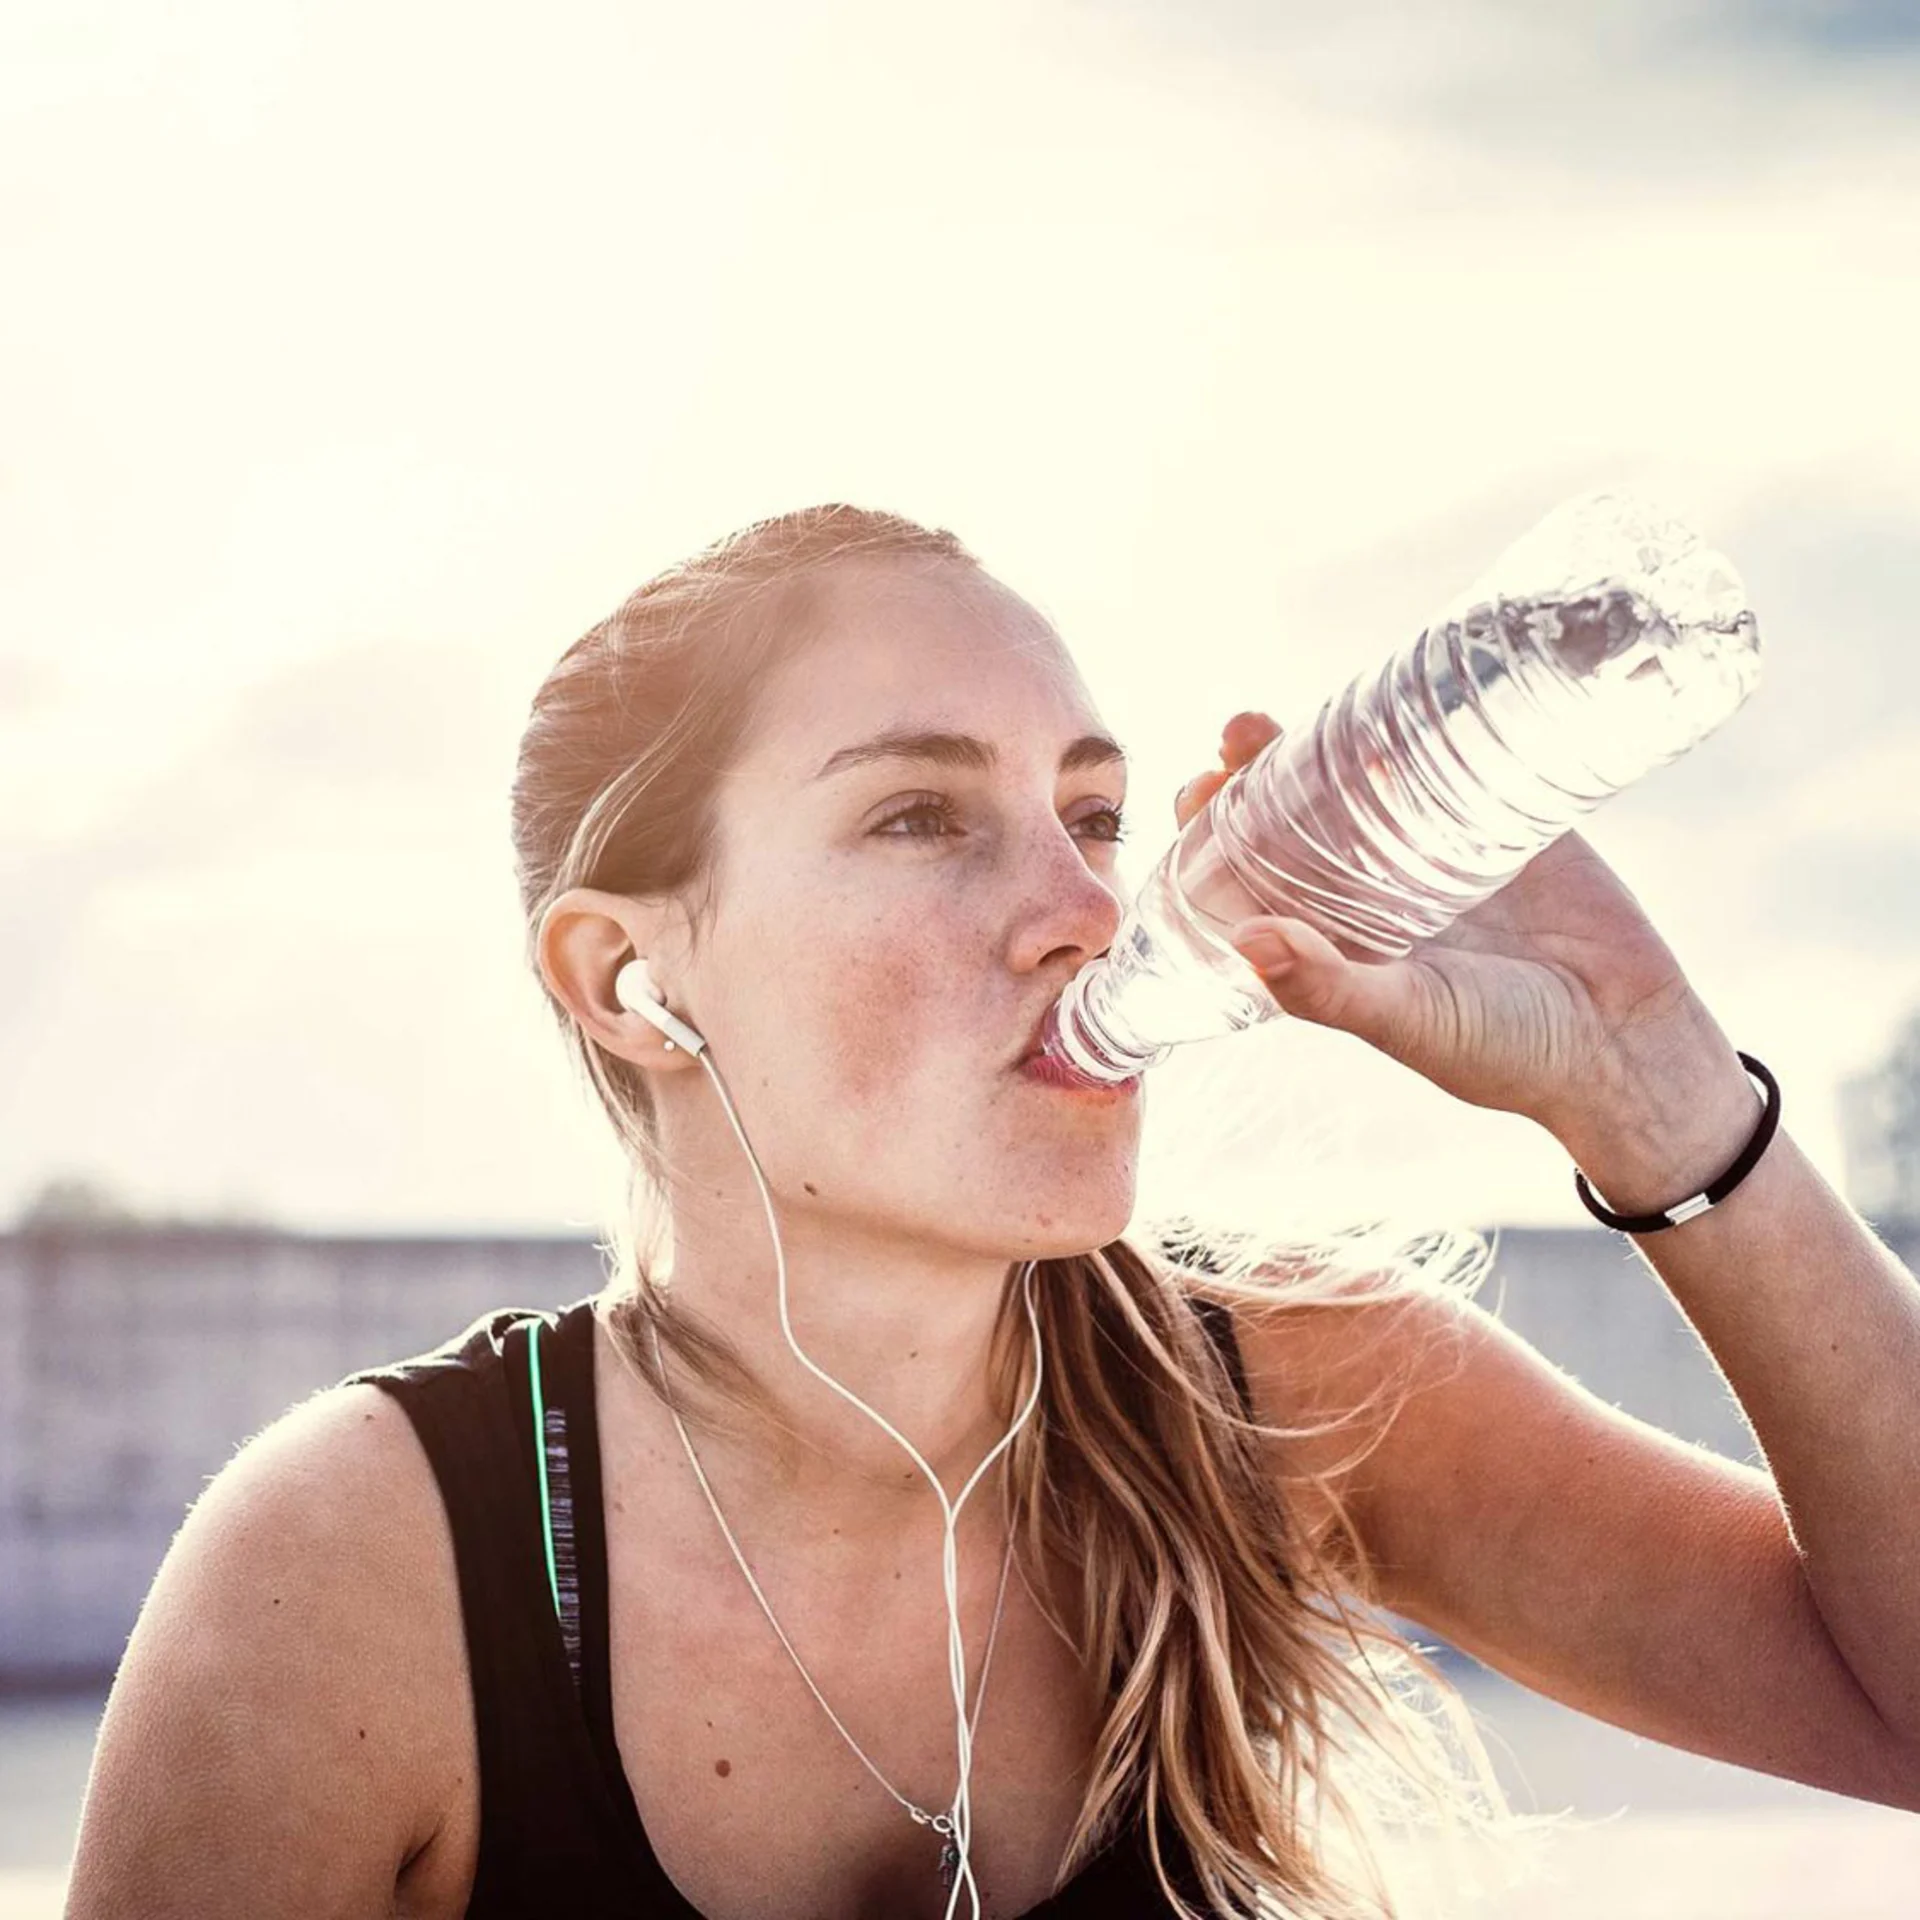 A young woman drinks water from a bottle after exercising